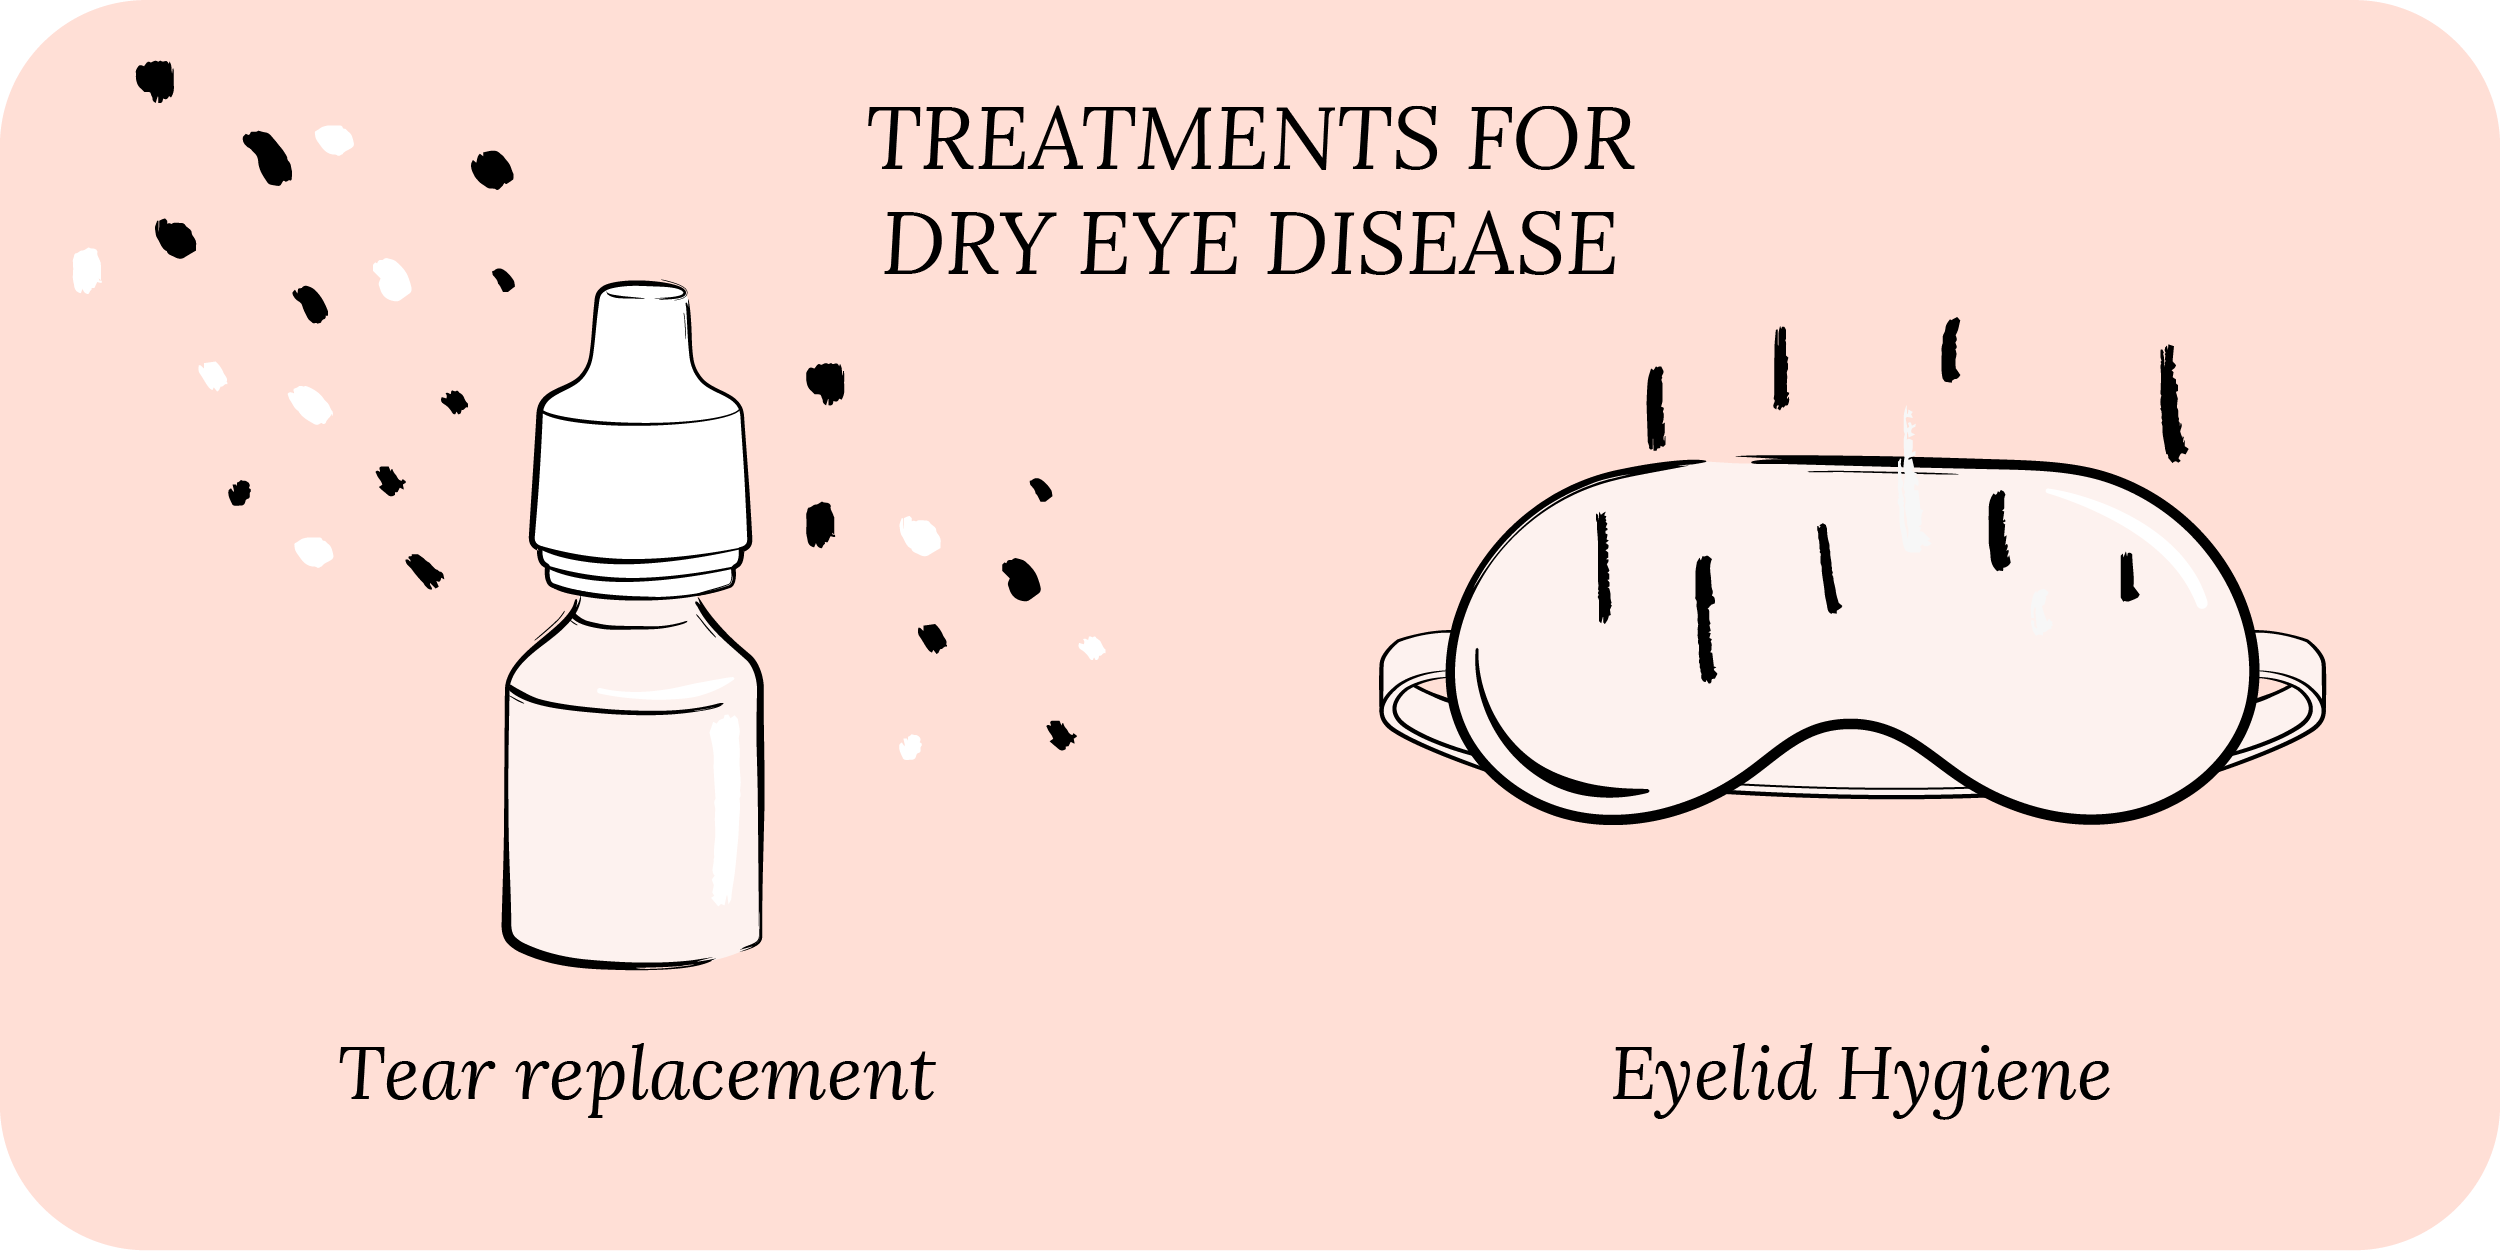 What are the best treatments for dry eye disease?